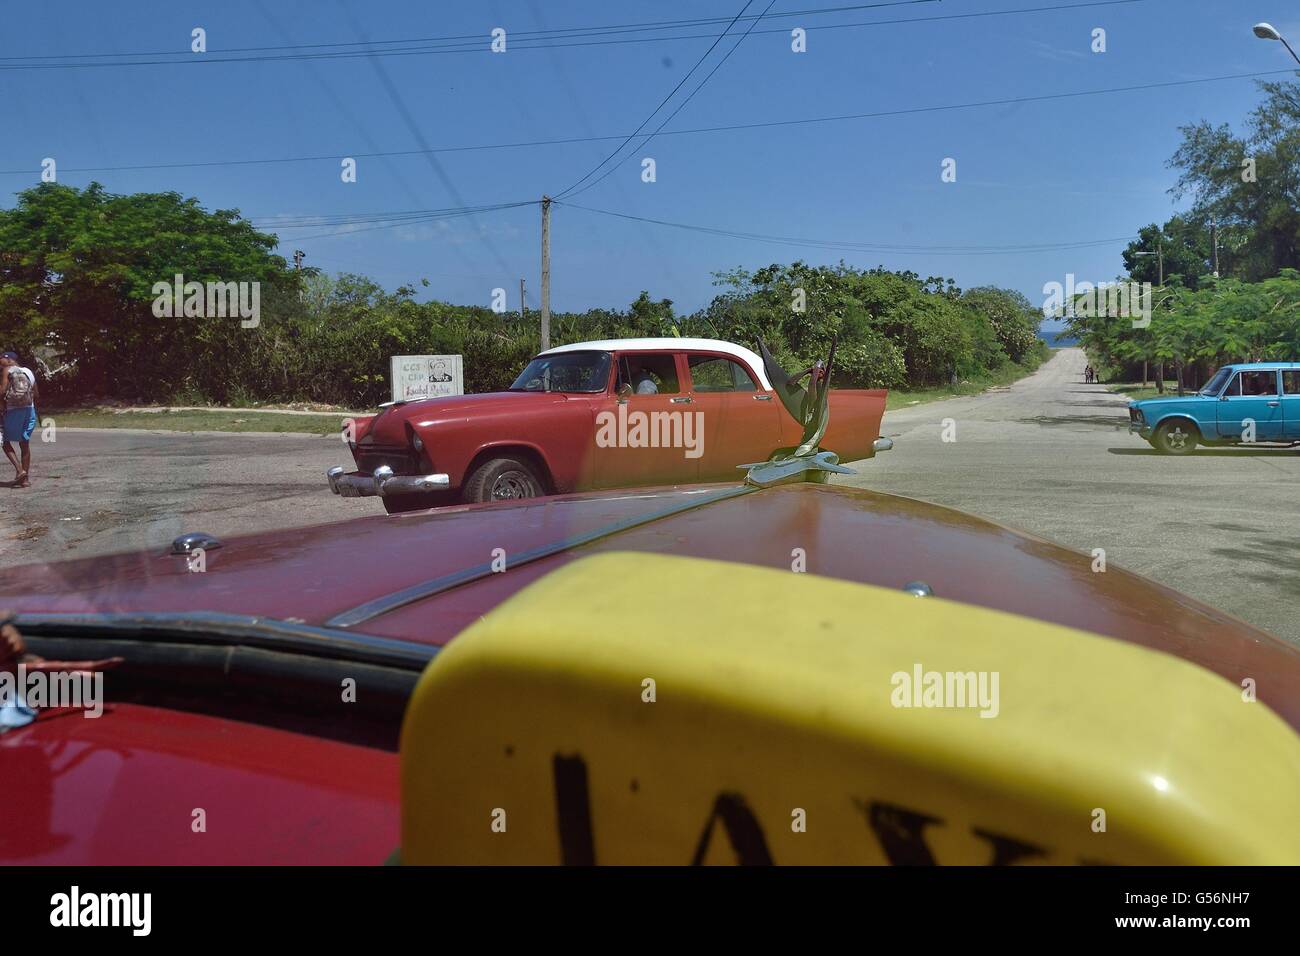 Alamar, Alamar, Cuba. 21st May, 2016. Daily Life as seen in street scenes from Alamar, the largest public housing project in Cuba with 100,000 residents, Alamar, Cuba, May 2016. © Rory Merry/ZUMA Wire/Alamy Live News Stock Photo